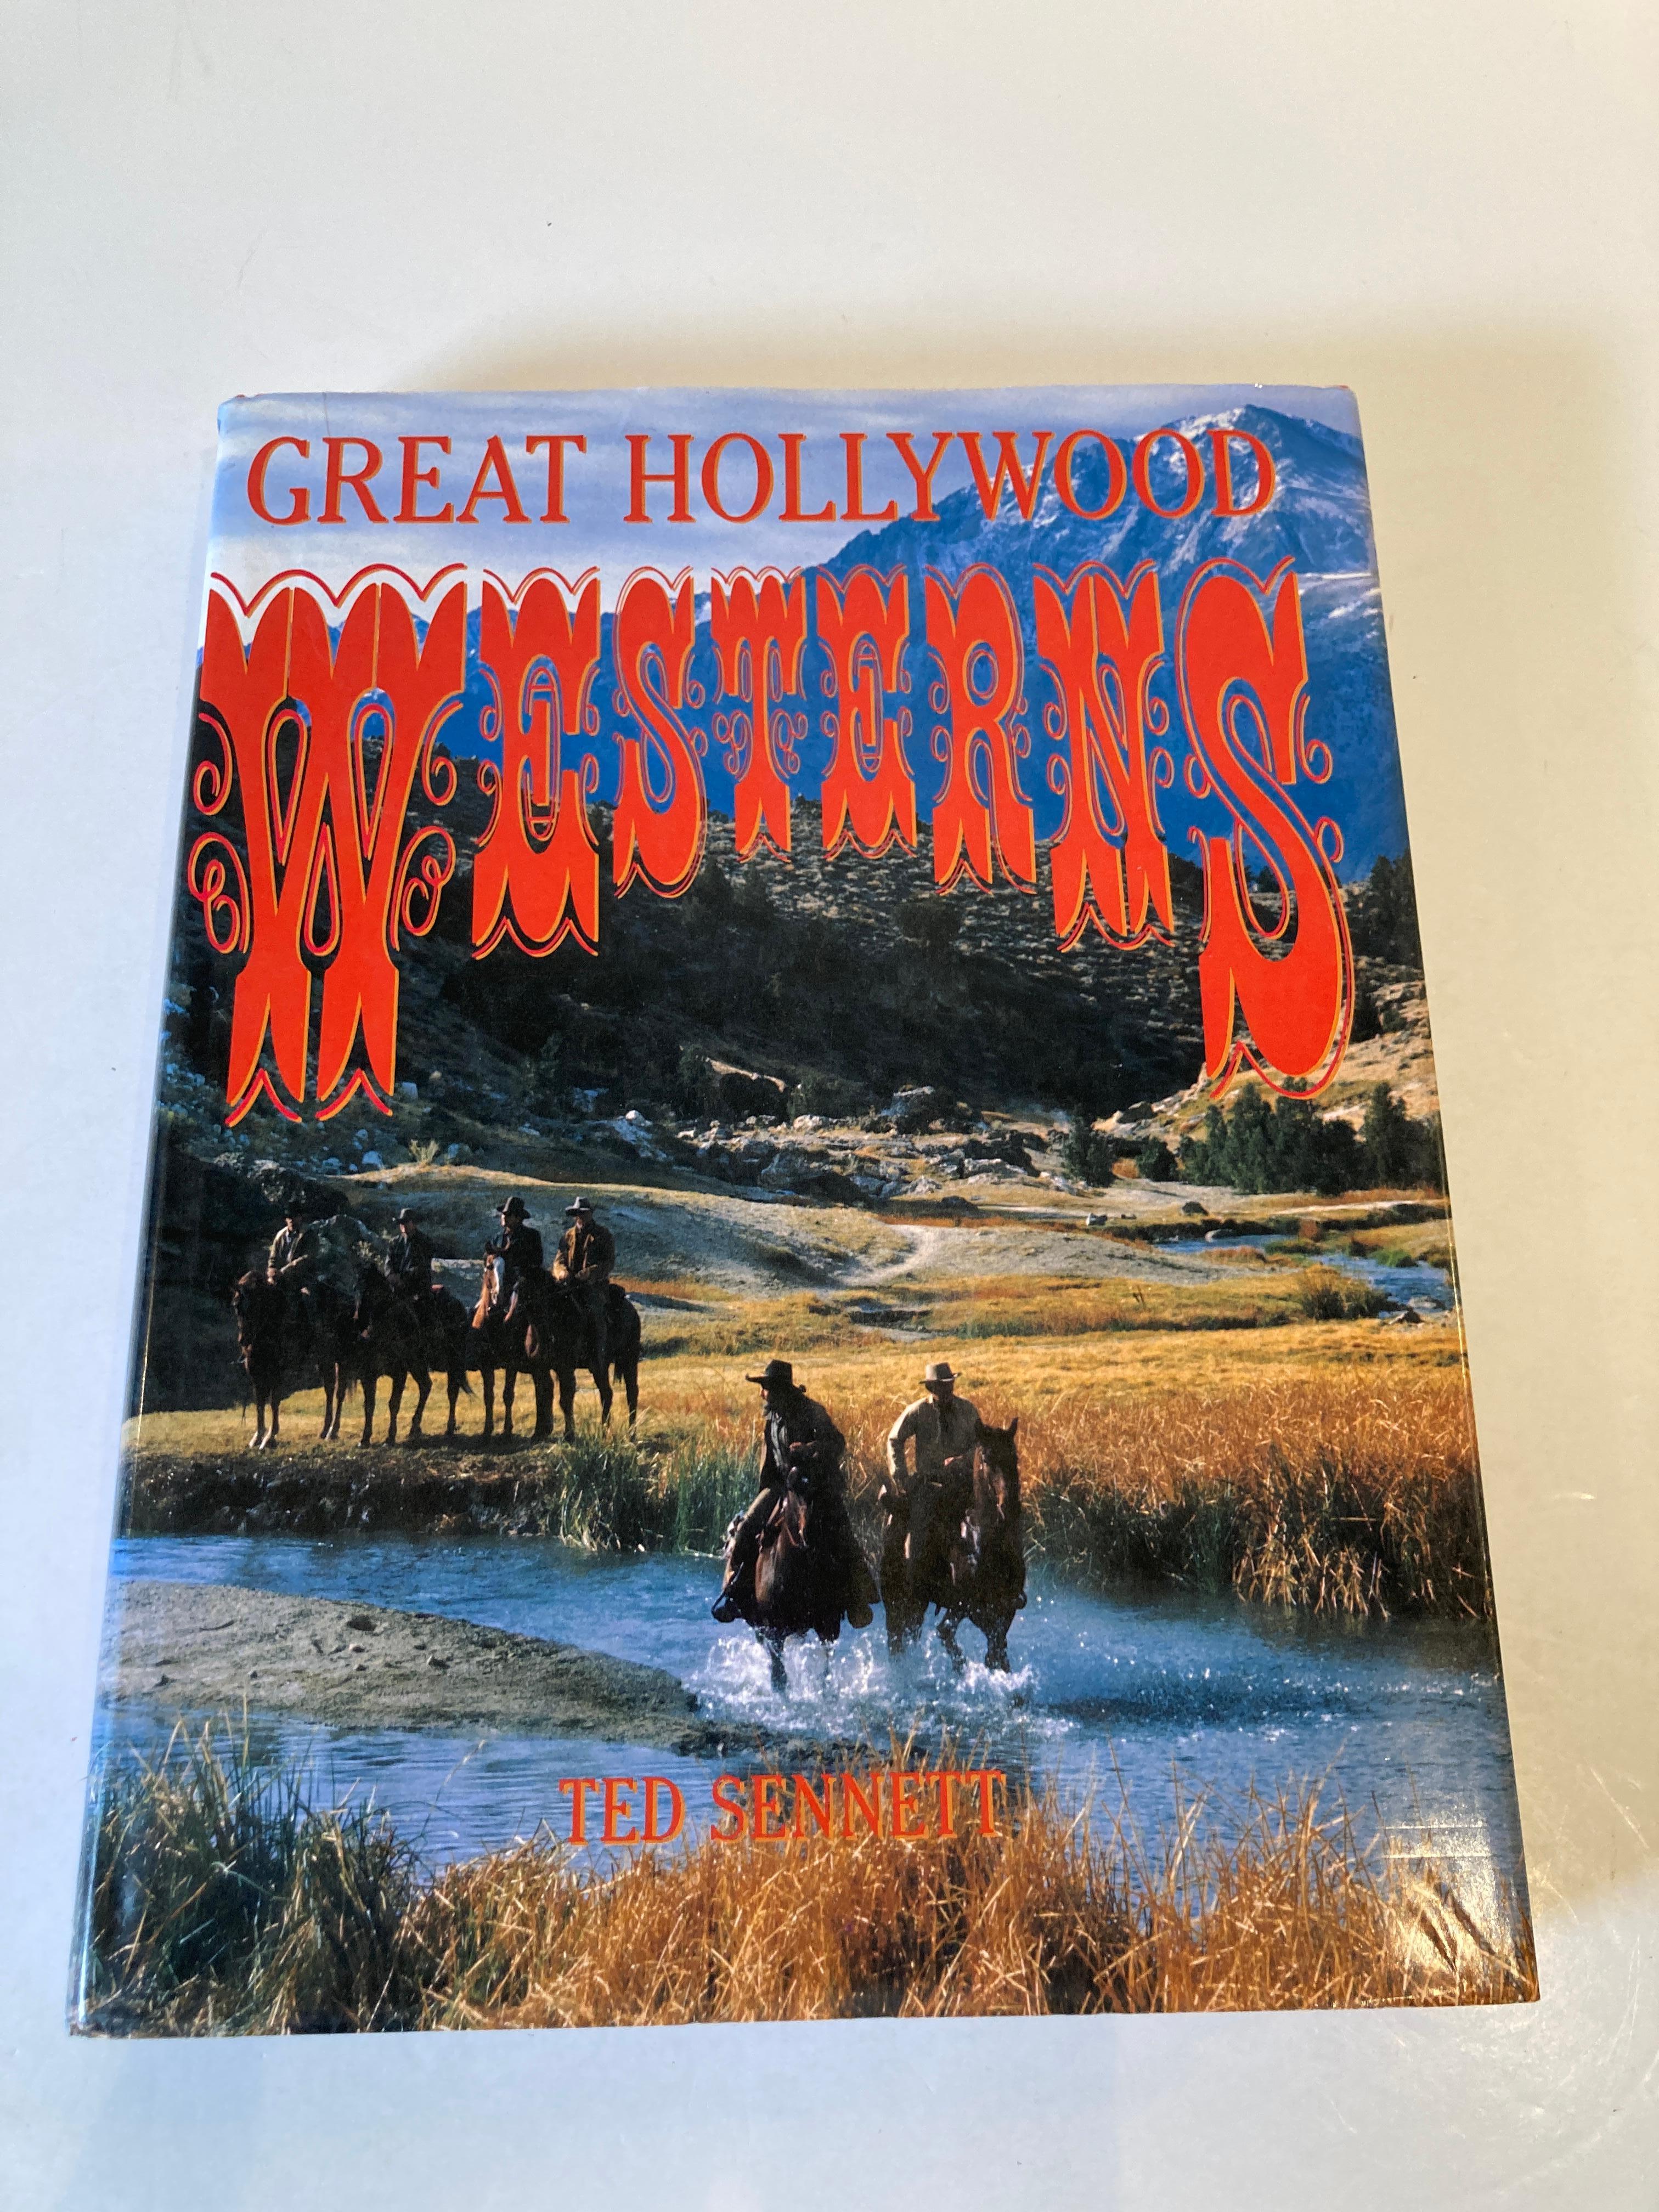 Great Hollywood Westerns by Ted Sennett
Abrams, 1990 - Motion pictures - 272 pages.
This volume offers all the timeless images and icons of the movie West, from wagon trains snaking across the prairies to the grizzled face of John Wayne. 
With 75